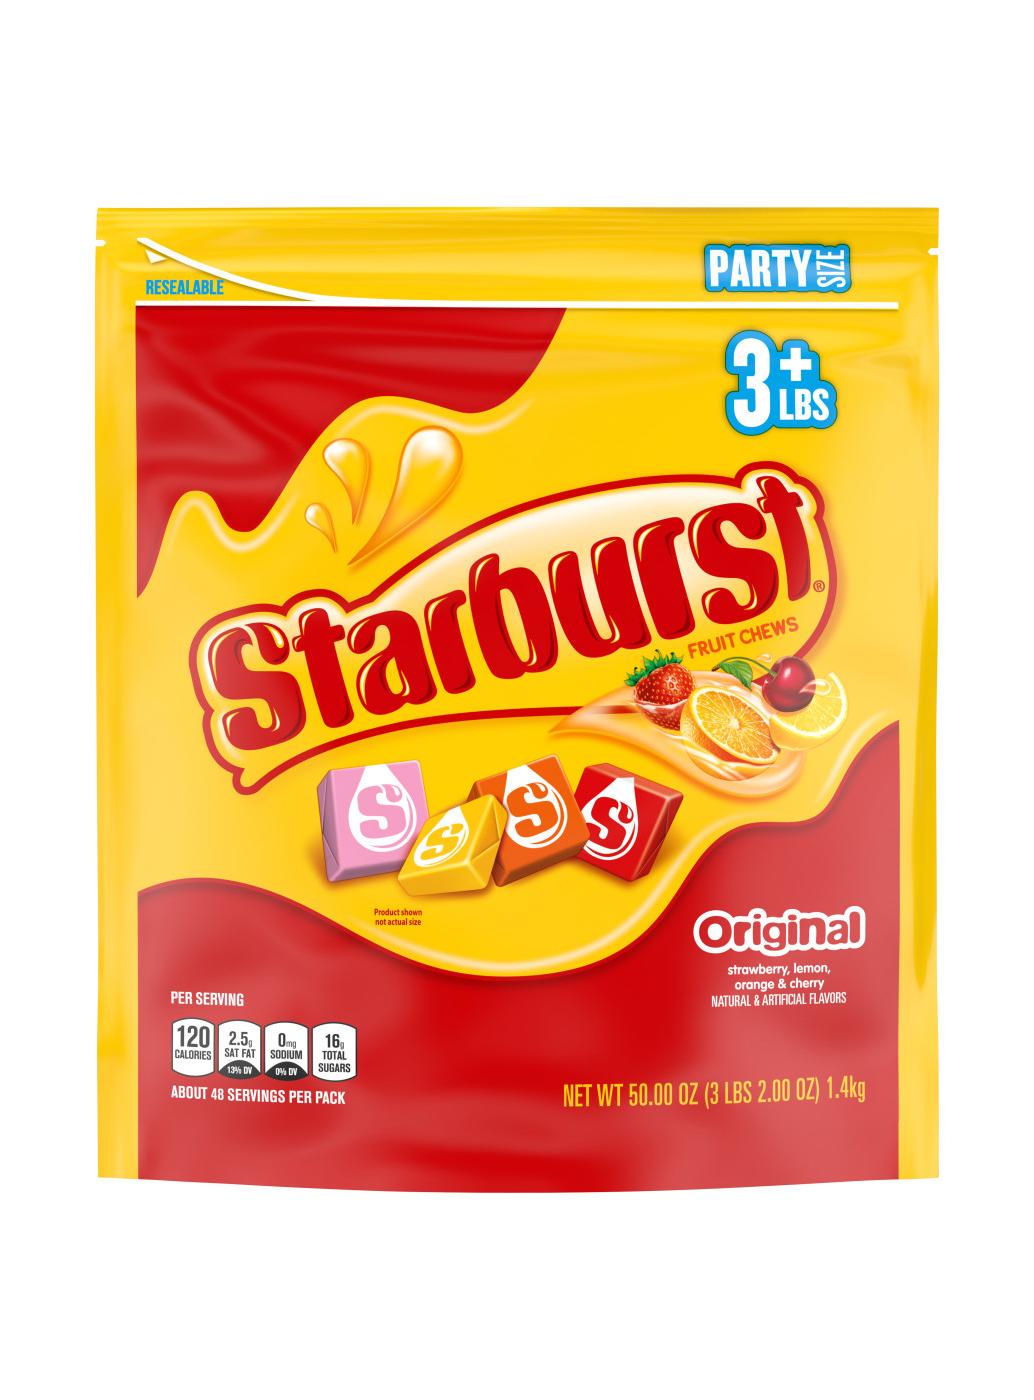 Starburst Original Fruit Chews Candy - Party Size; image 1 of 5